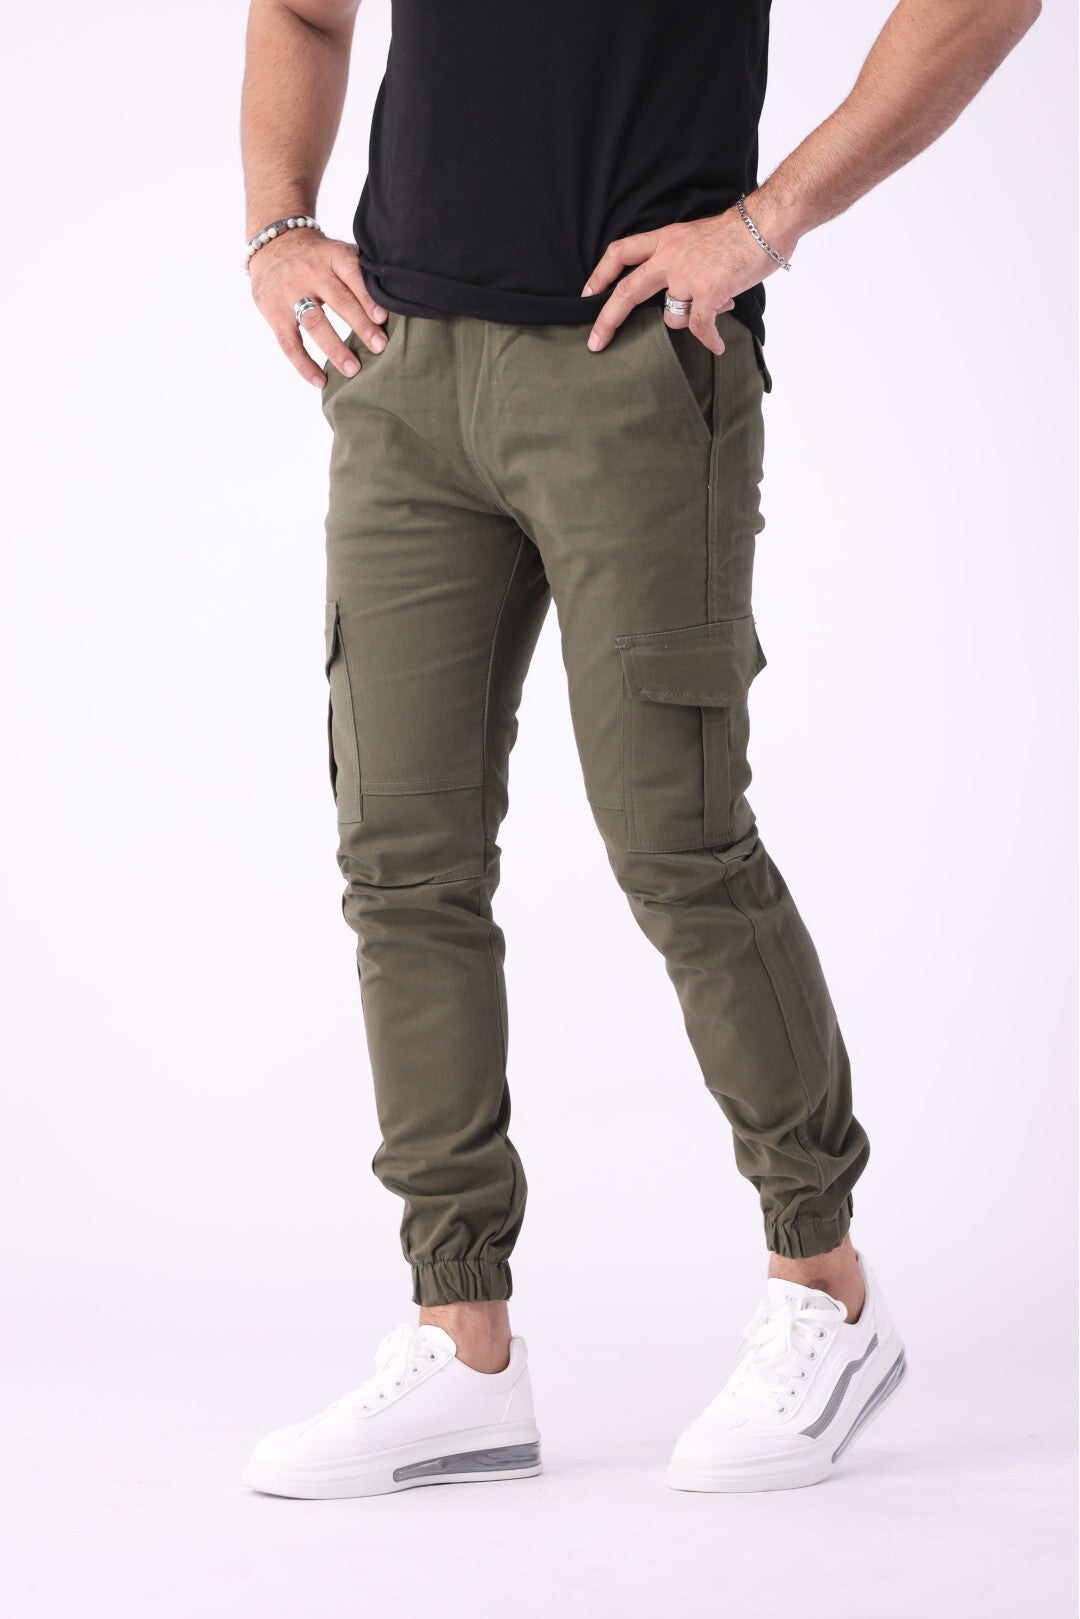 Guide Gear 6 Pocket Camo Pants for Men for Hunting India | Ubuy